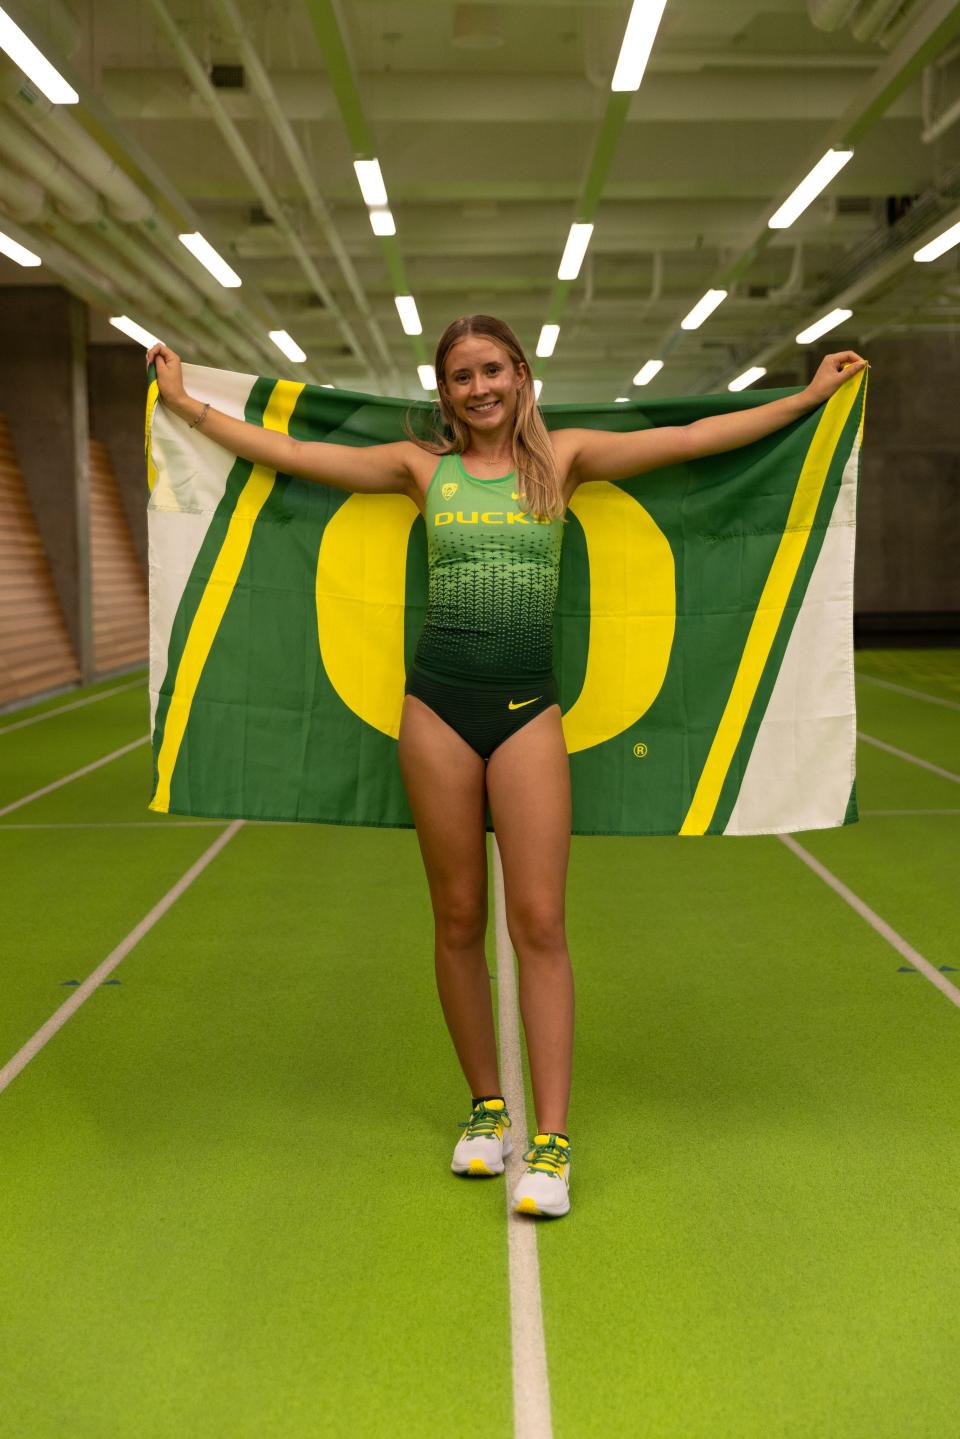 Goodyear Millennium senior Landen LeBlond poses for a photo at Hayward Field at the University of Oregon in Eugene.